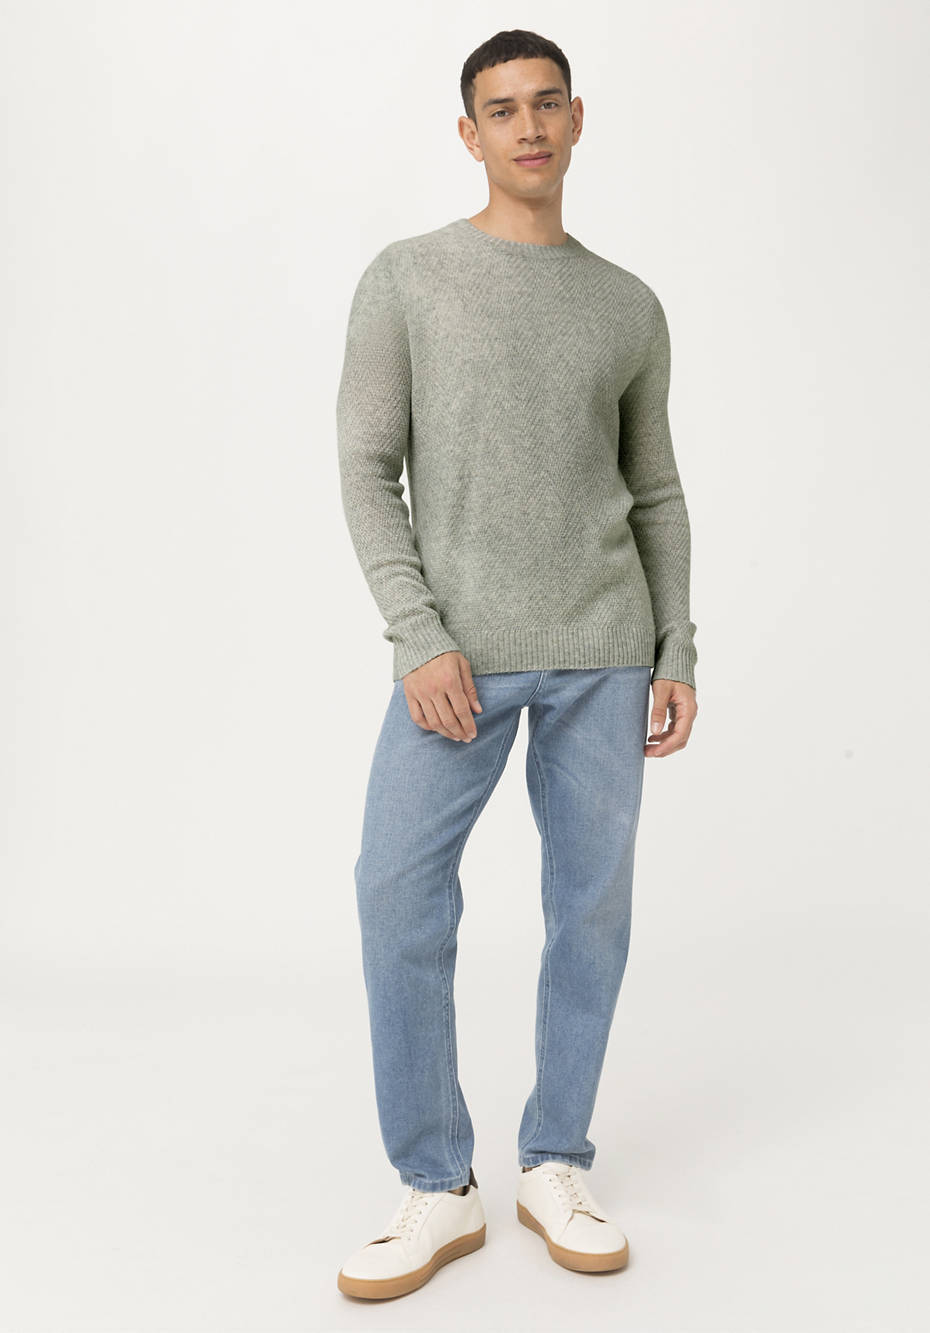 Virgin wool sweater with yak and cotton